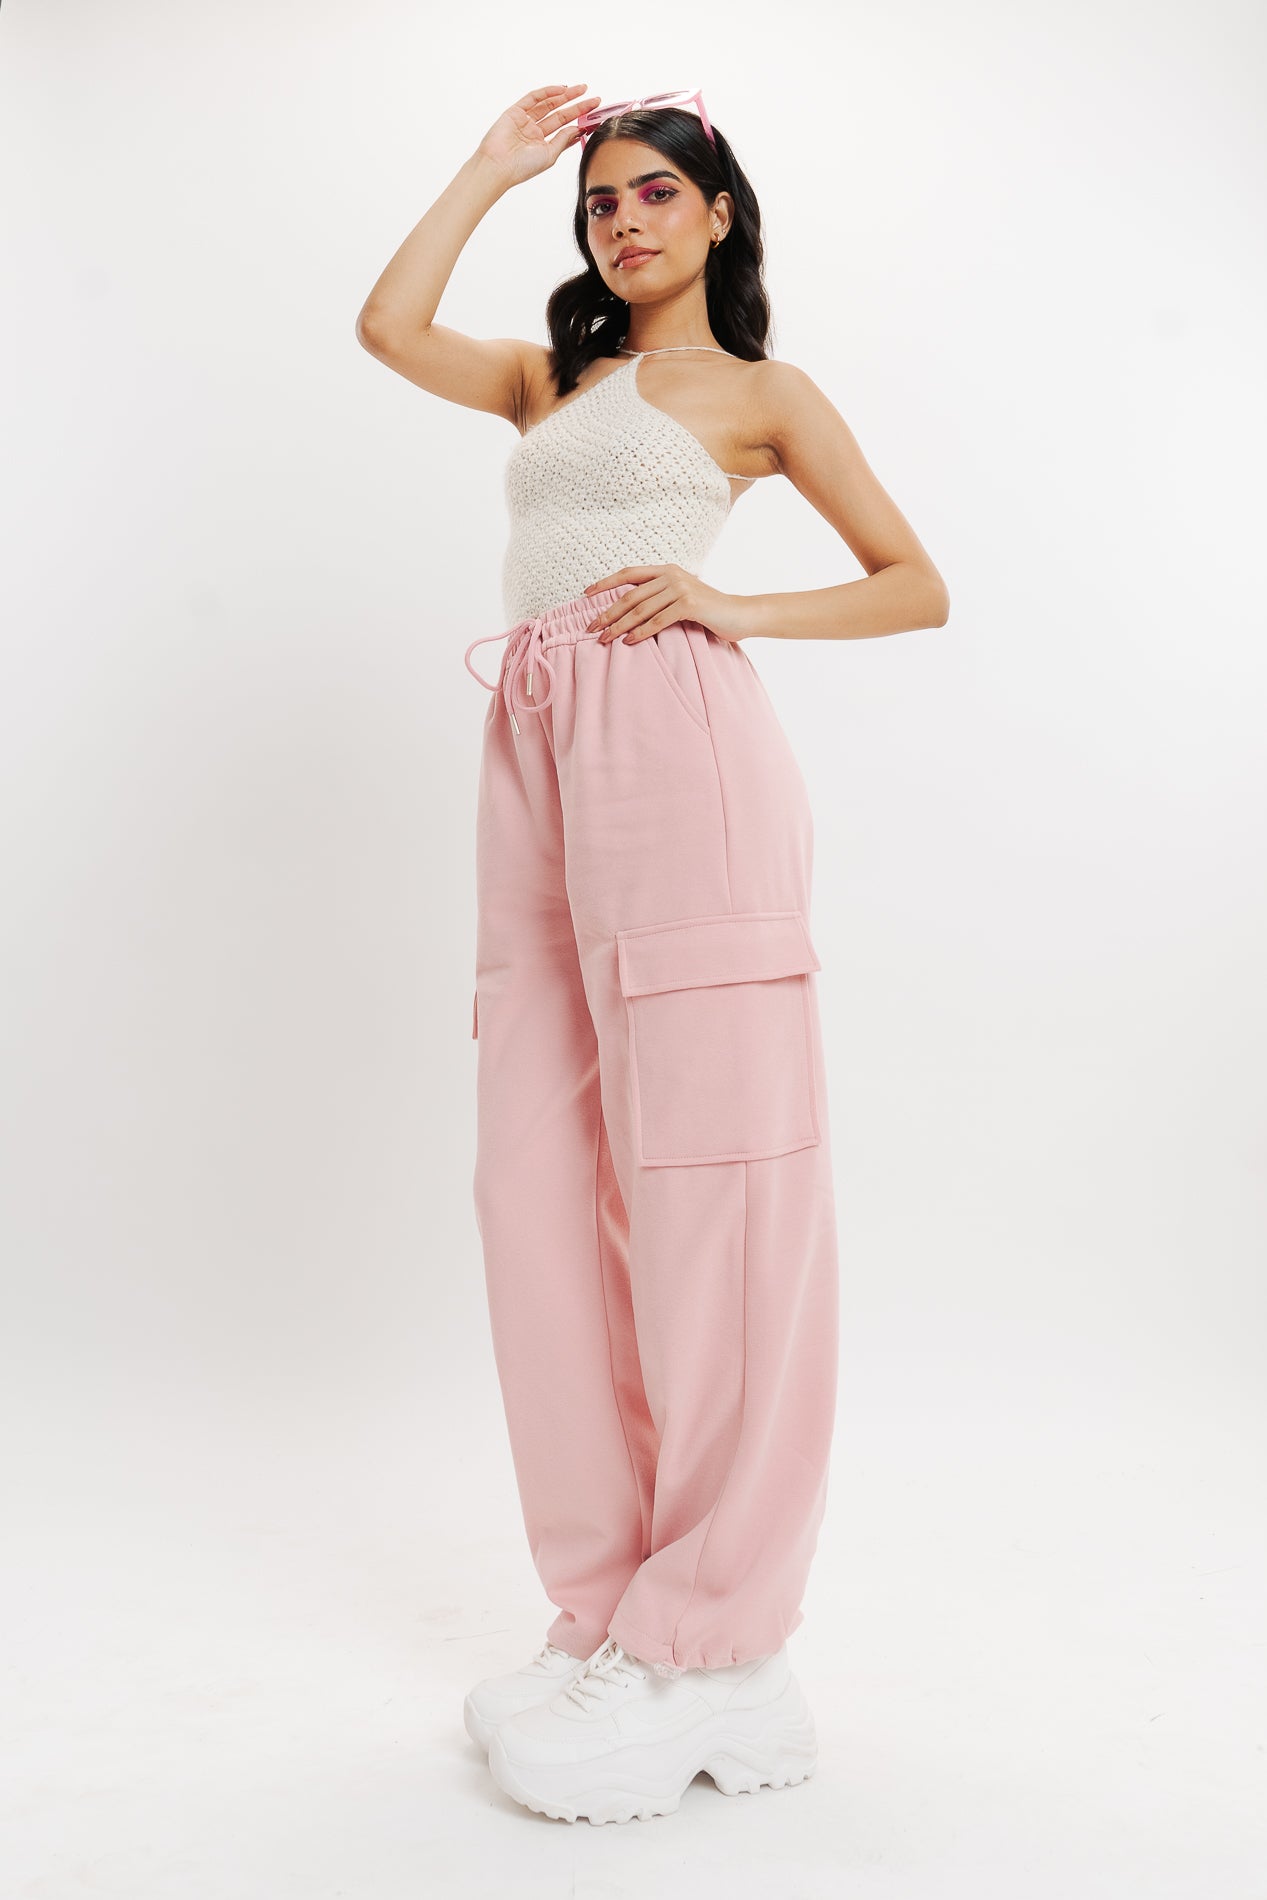 BABY PINK CARGO PANT